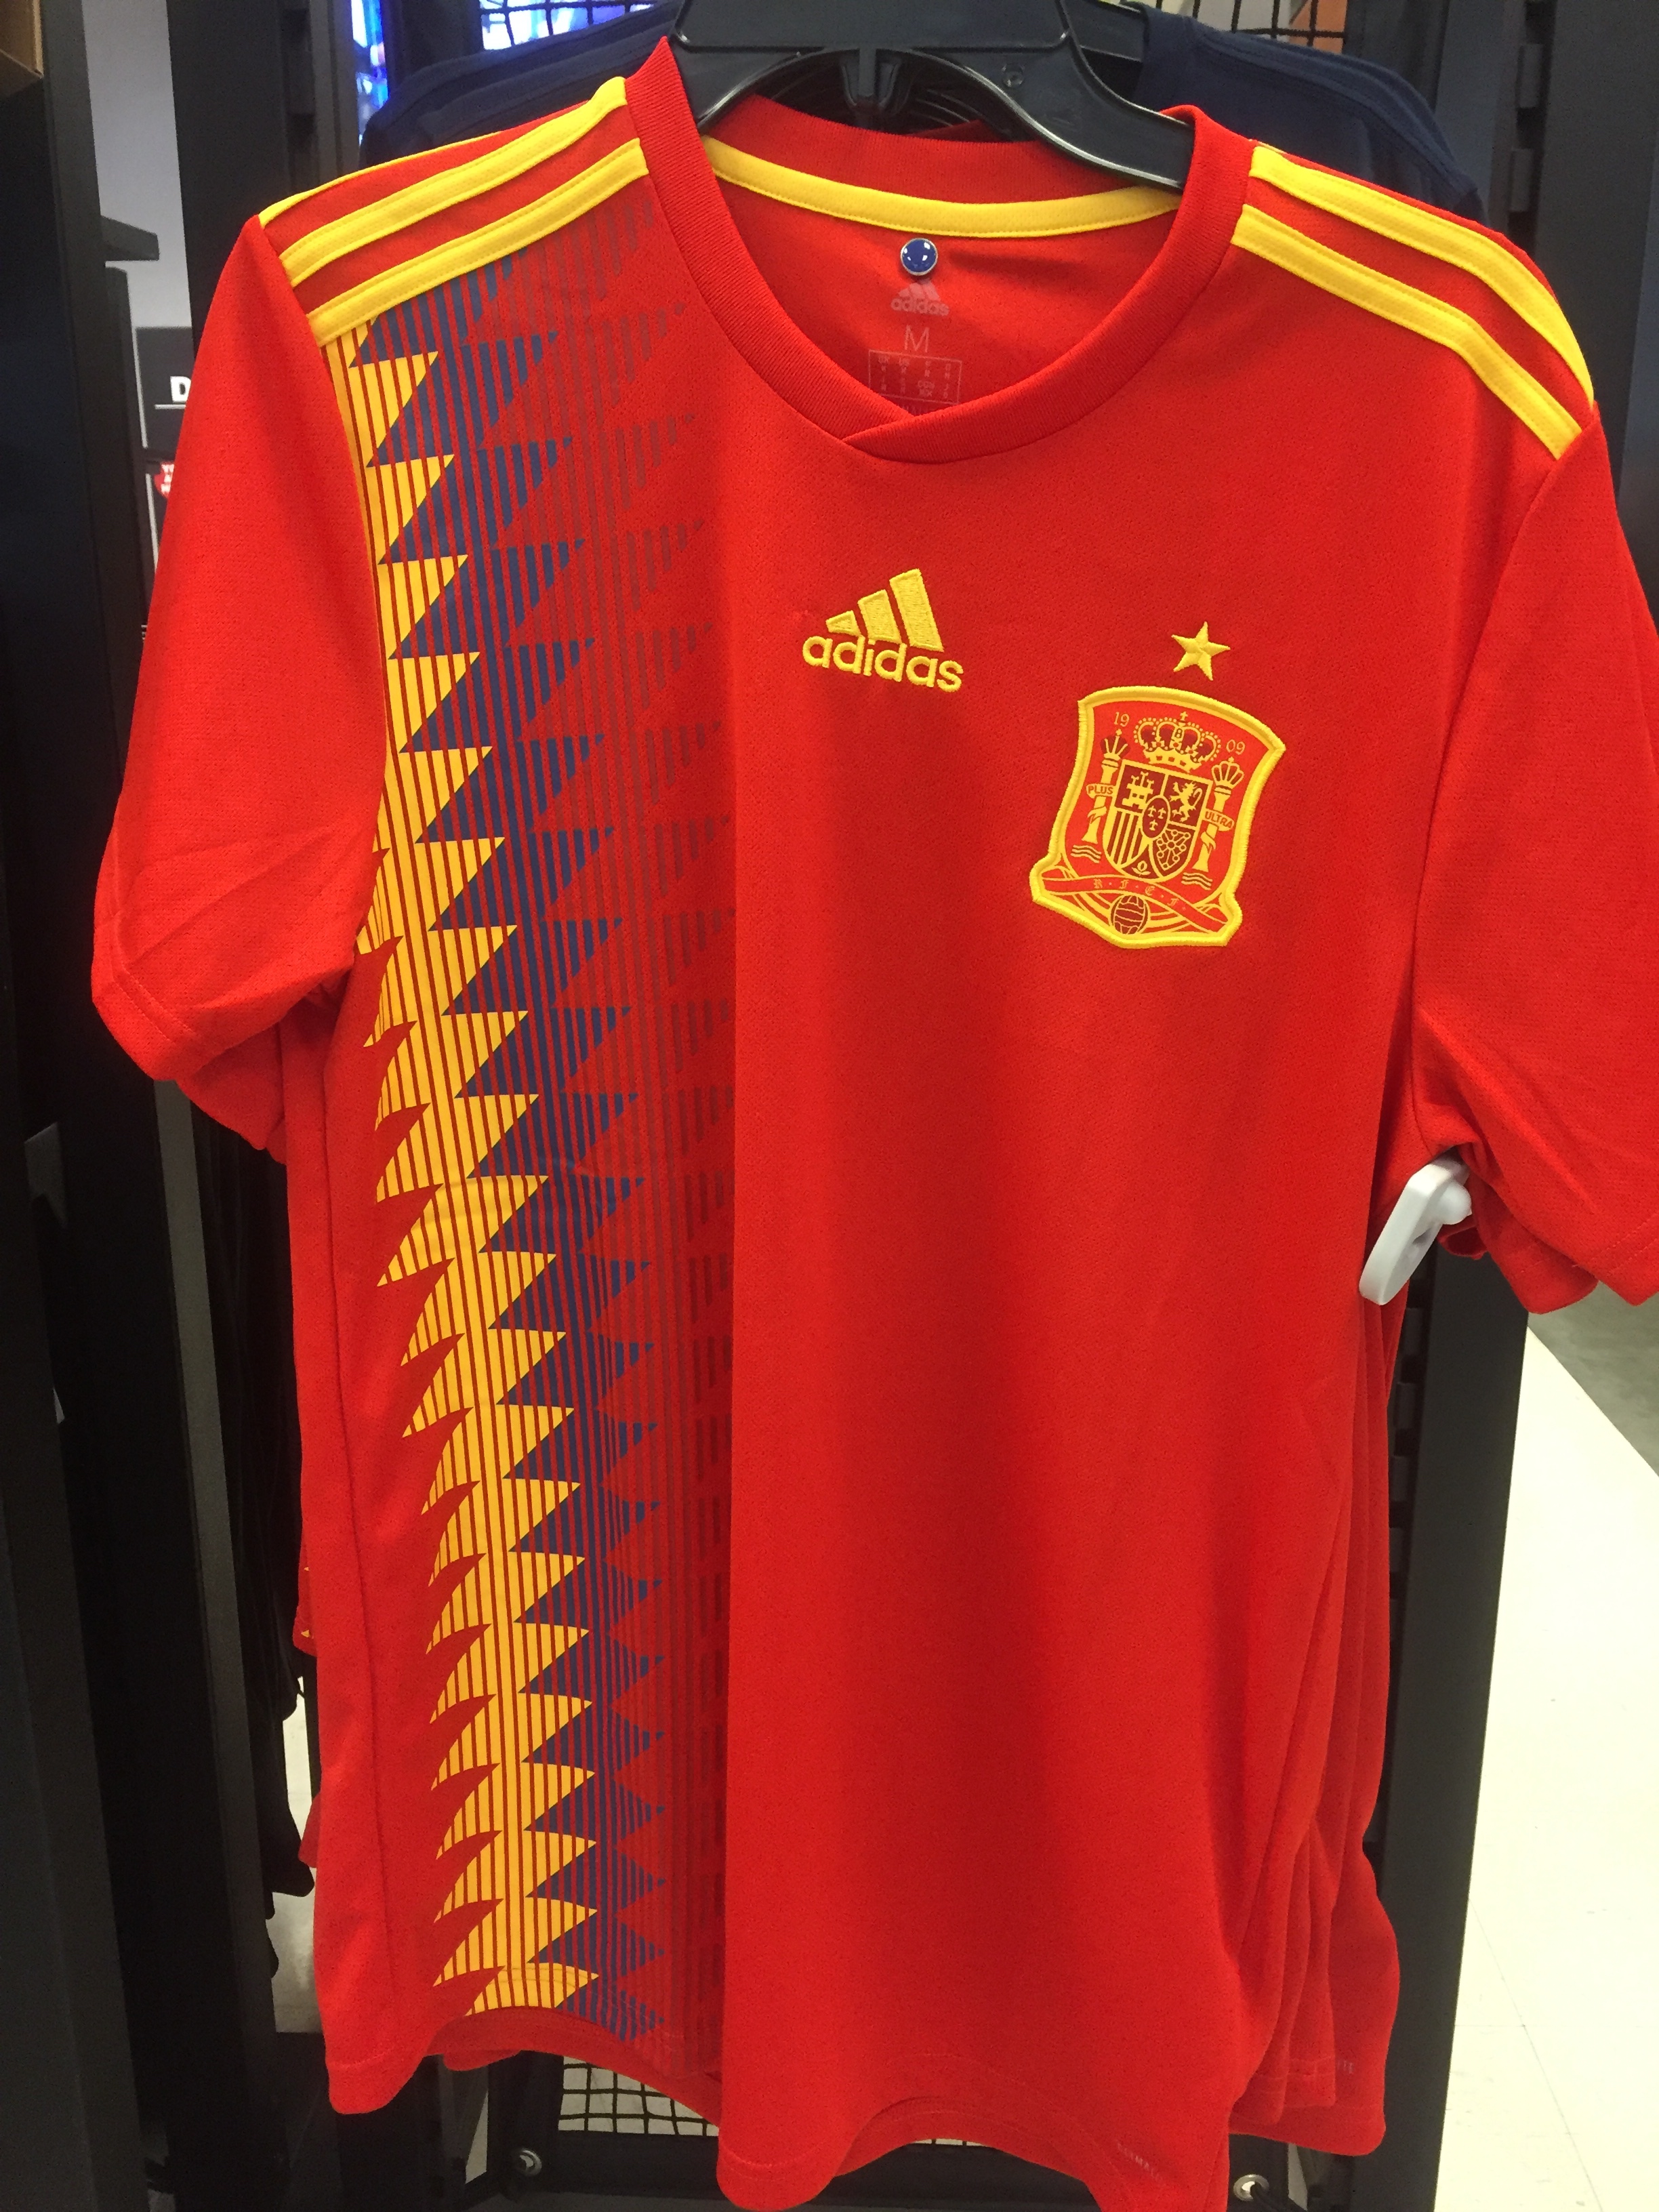 spain home jersey 2018